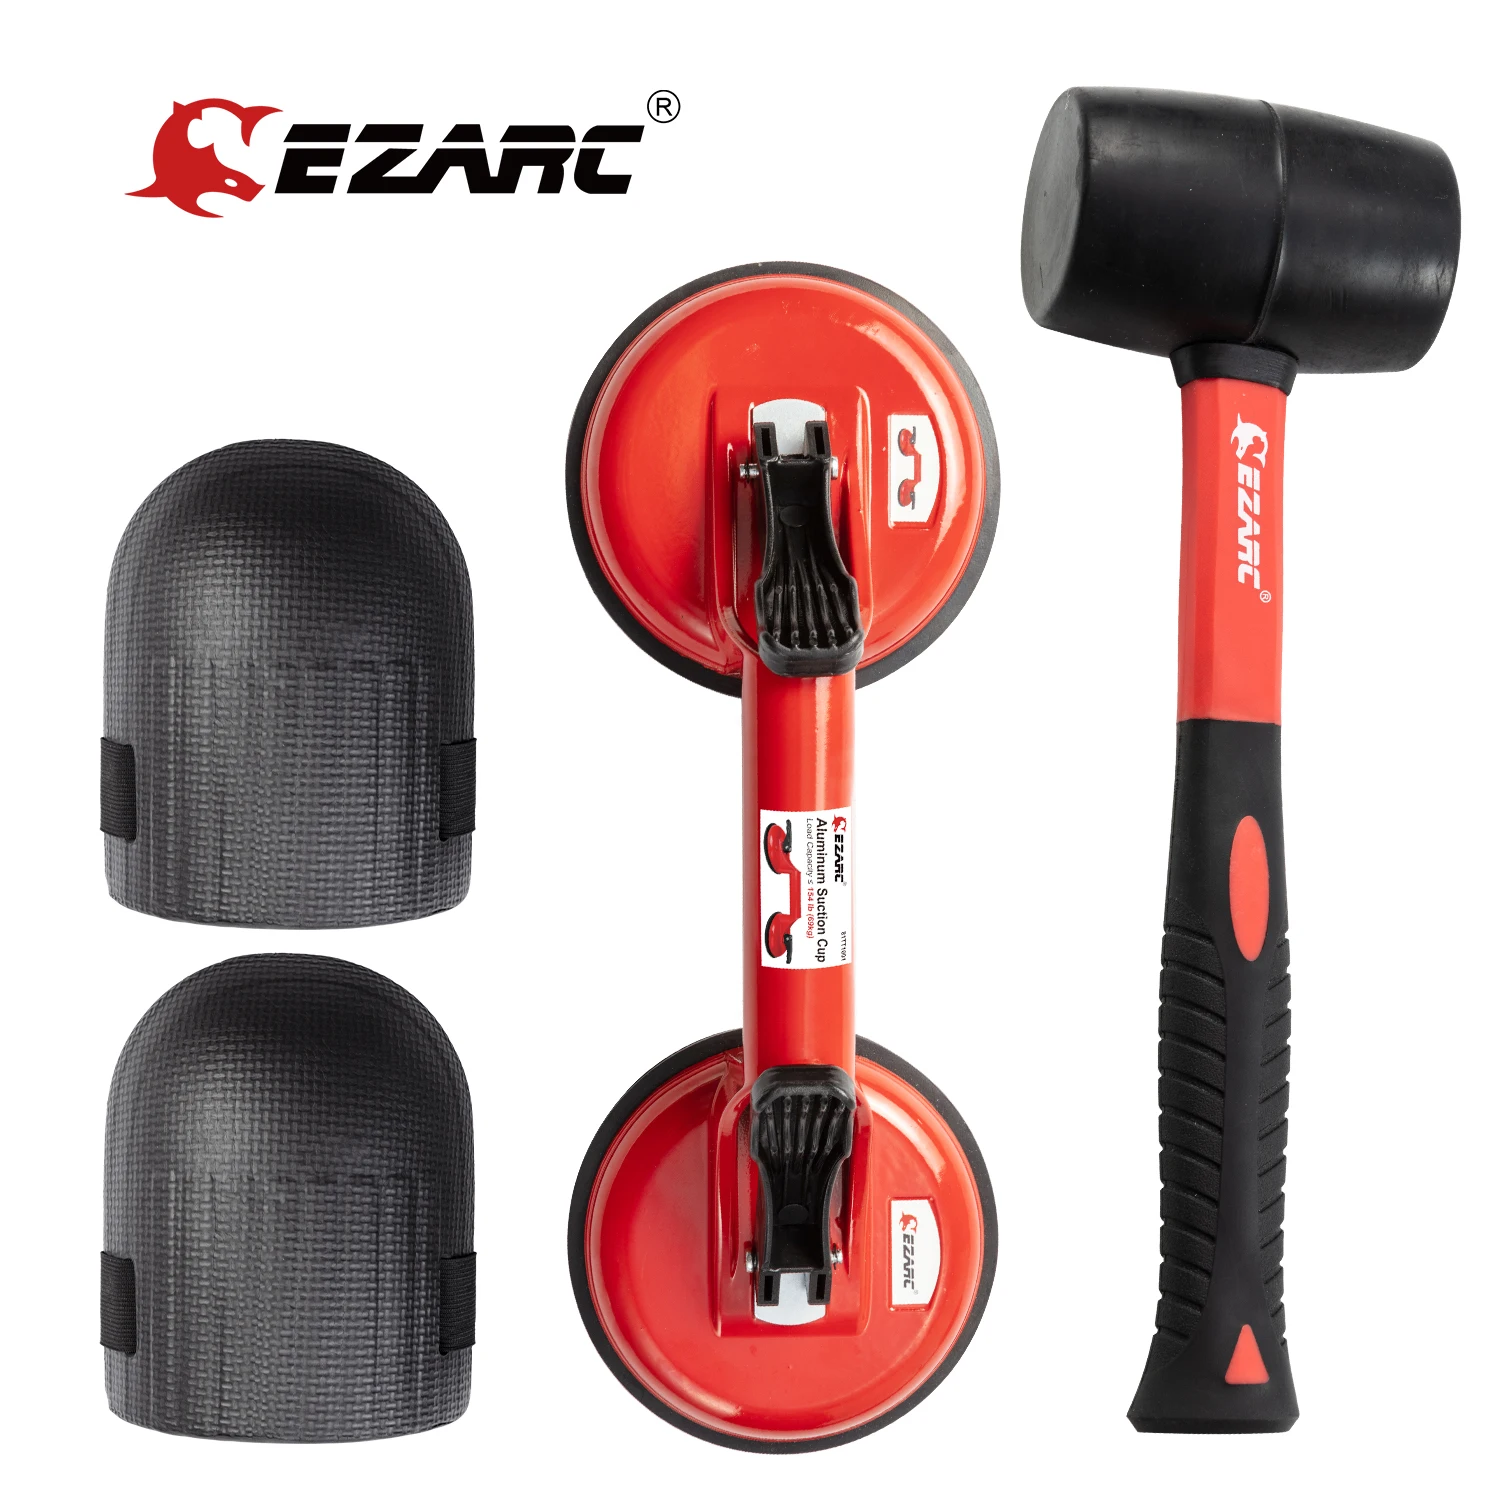 NEW Floor Gap Fixer Tool For Laminate Repair Include Suction Cup & Mallet 